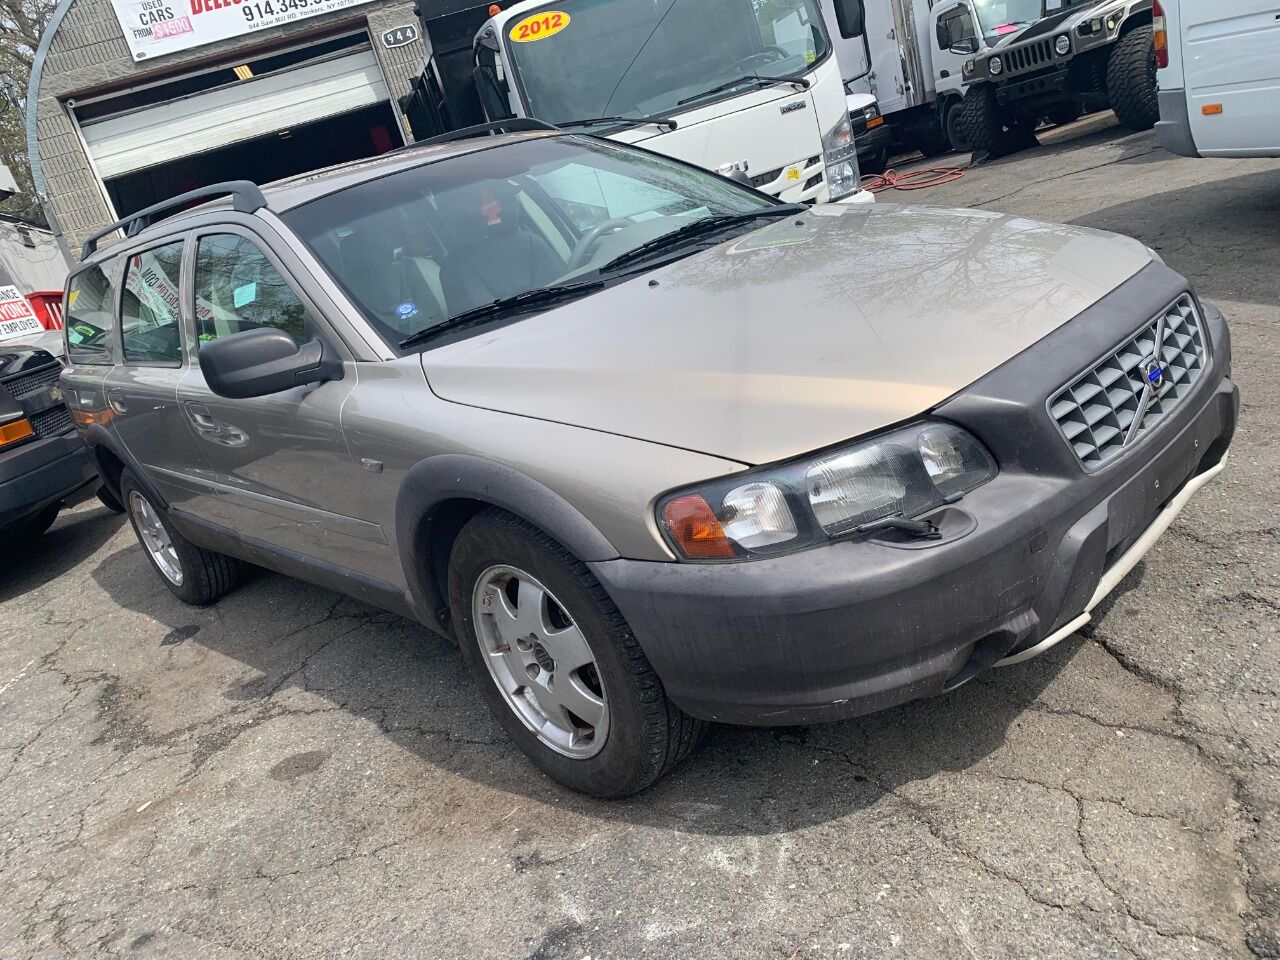 2003 Volvo XC70 For Sale - Carsforsale.com®